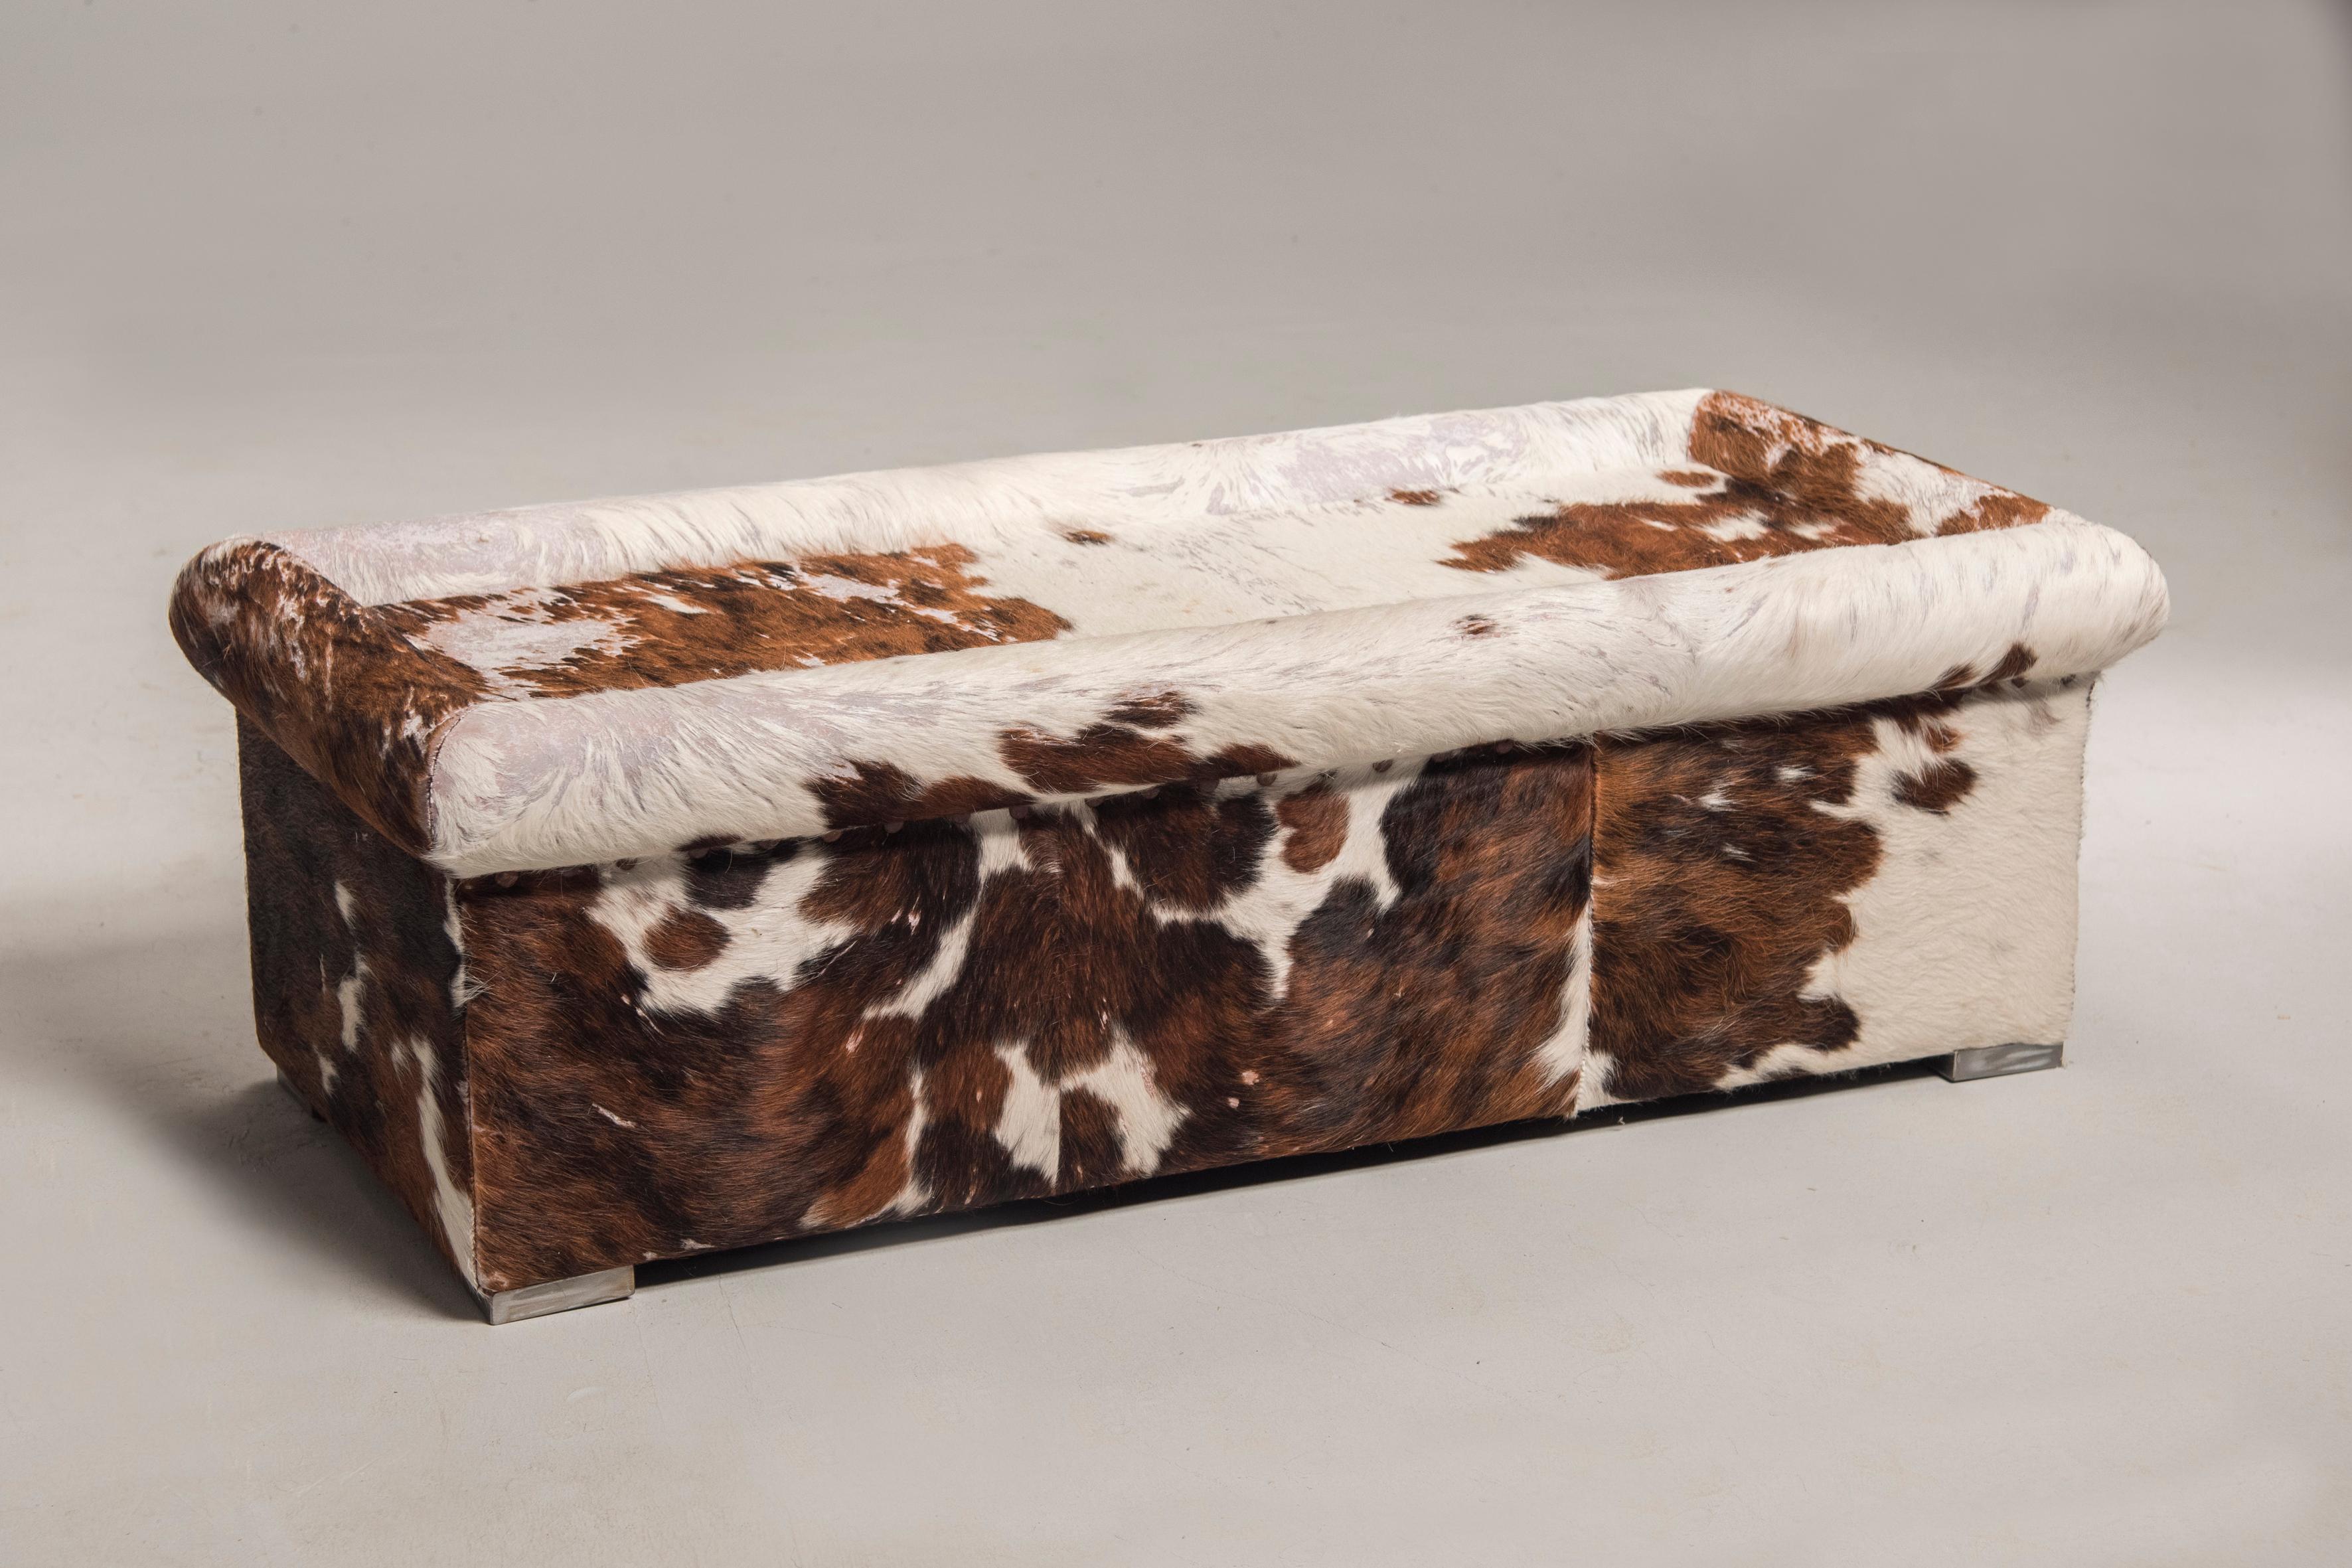 European Baxter Brown and White Cow Fur Leather Sofa with Pillows, Italy, 1990s